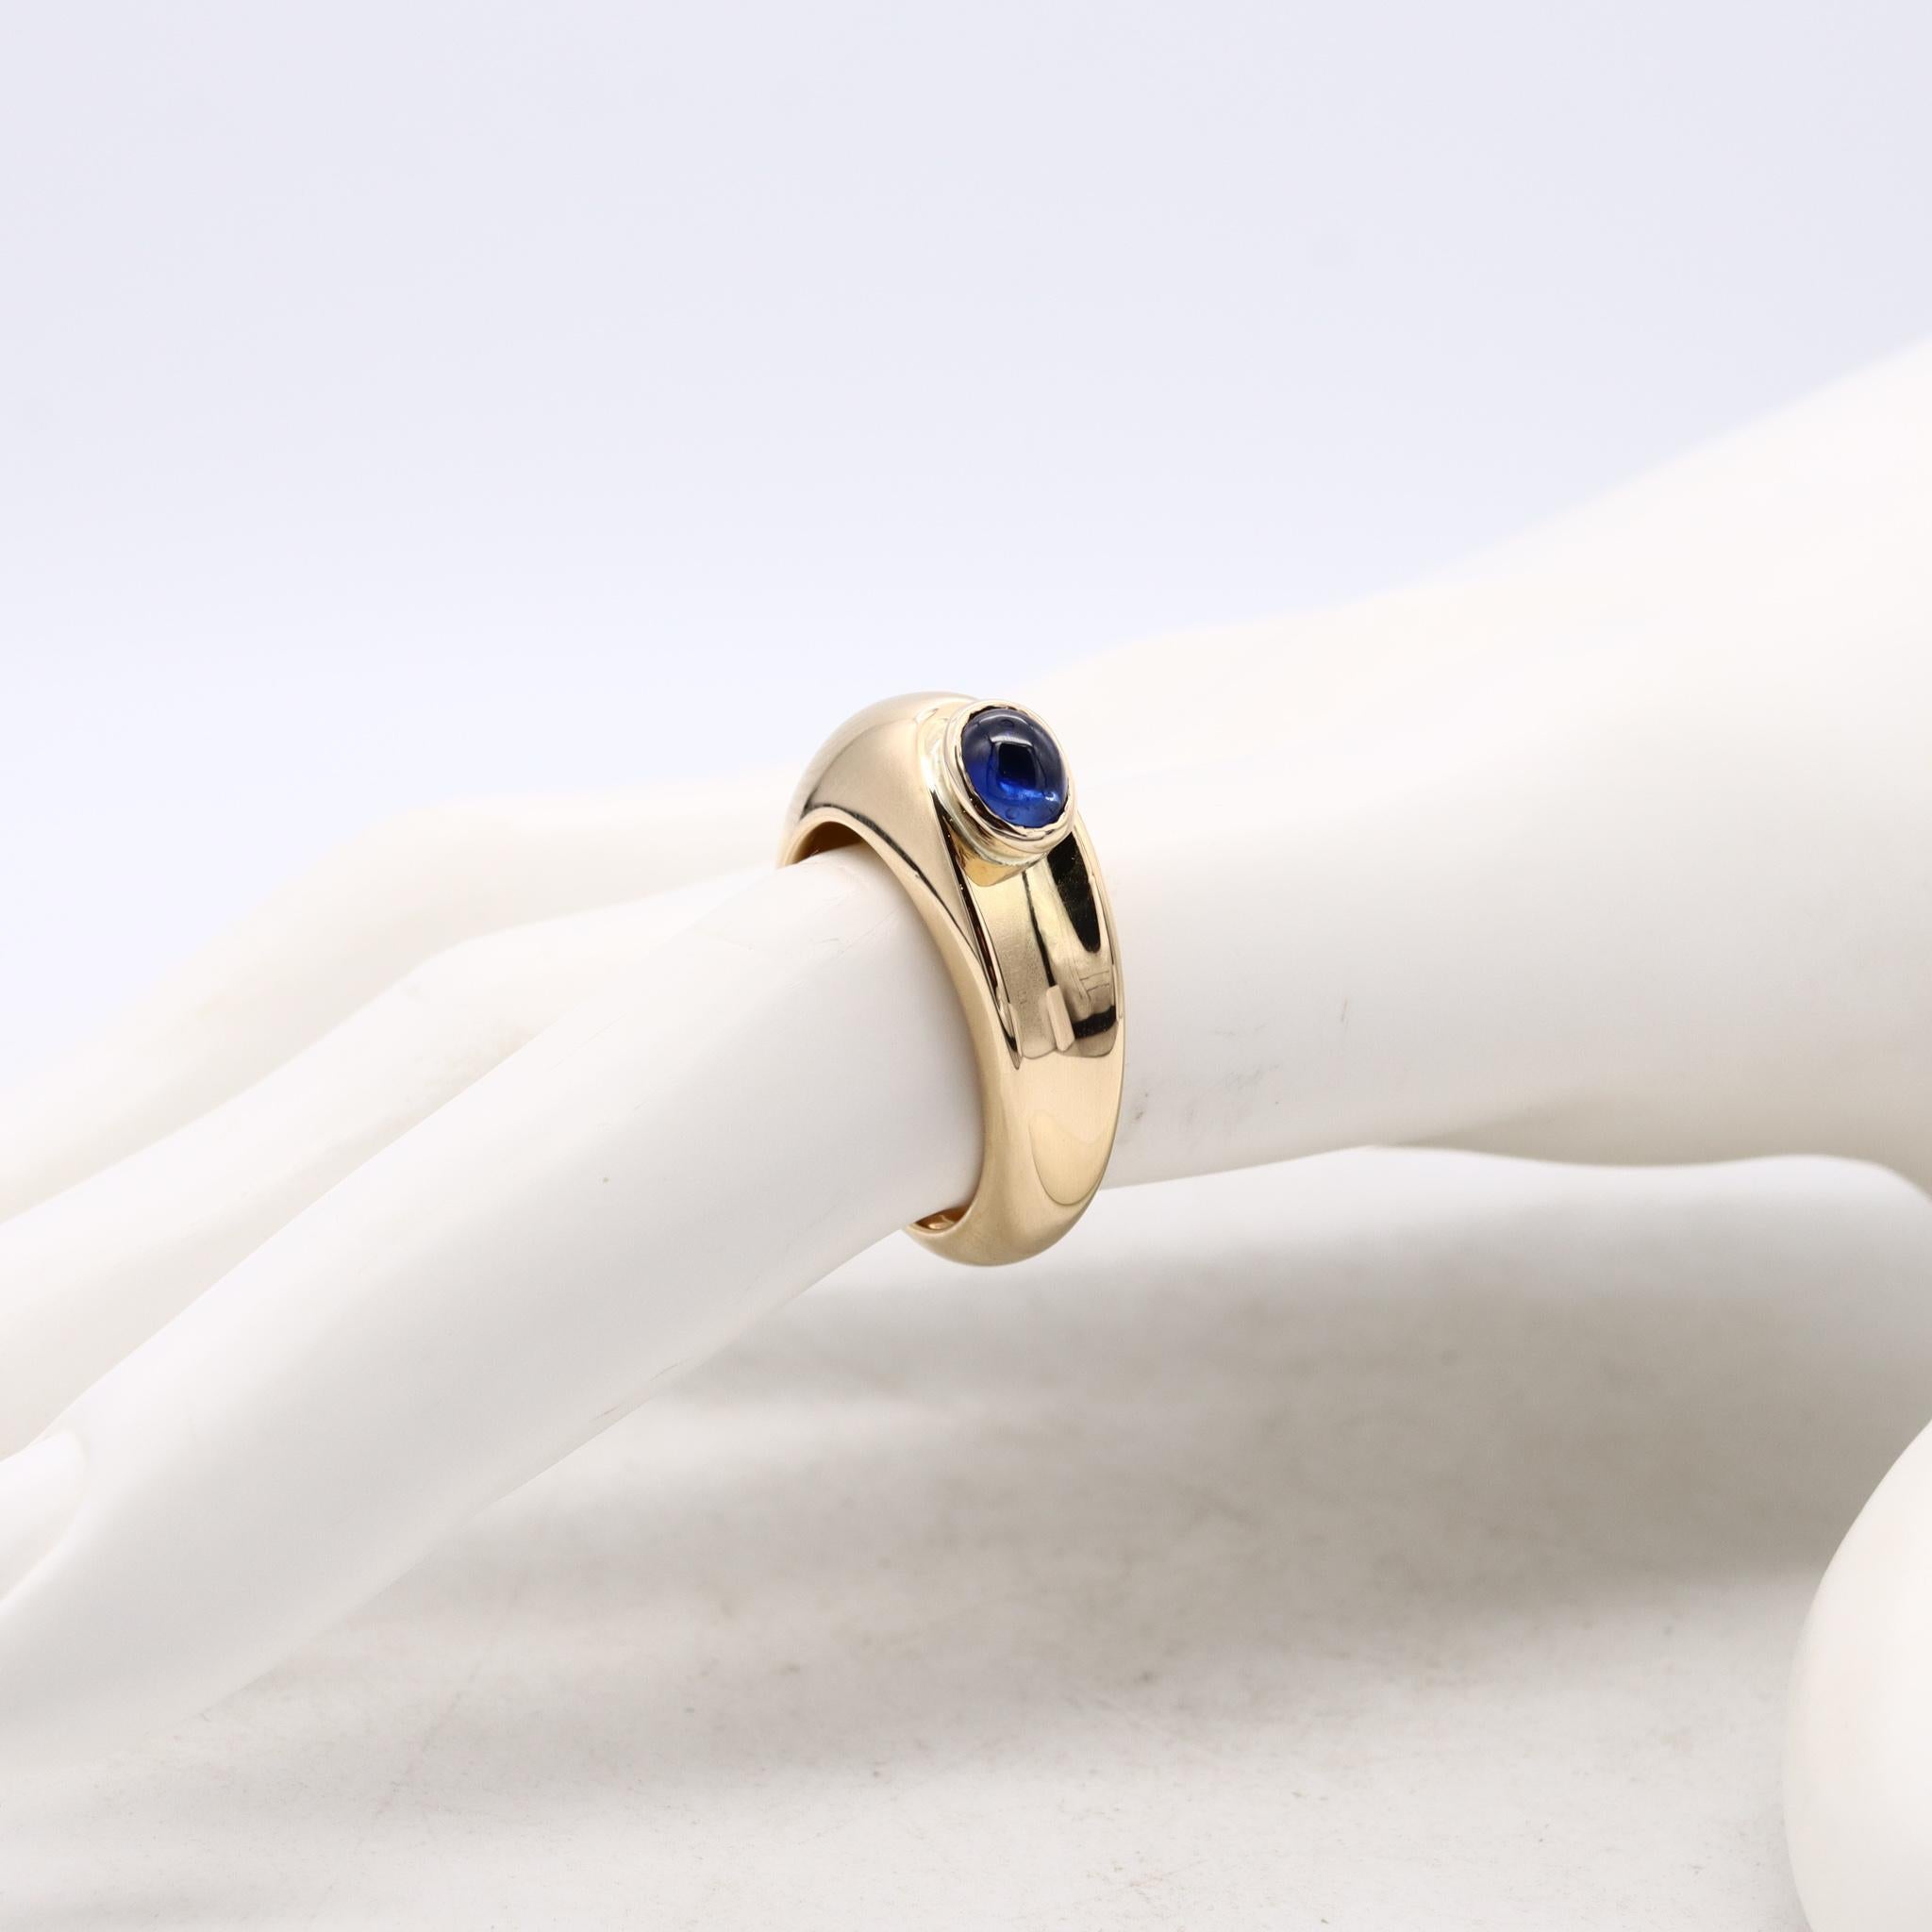 Fred of Paris Modernist Gem Set Ring 18Kt Yellow Gold 0.96 Cts Ceylon Sapphire In Excellent Condition For Sale In Miami, FL